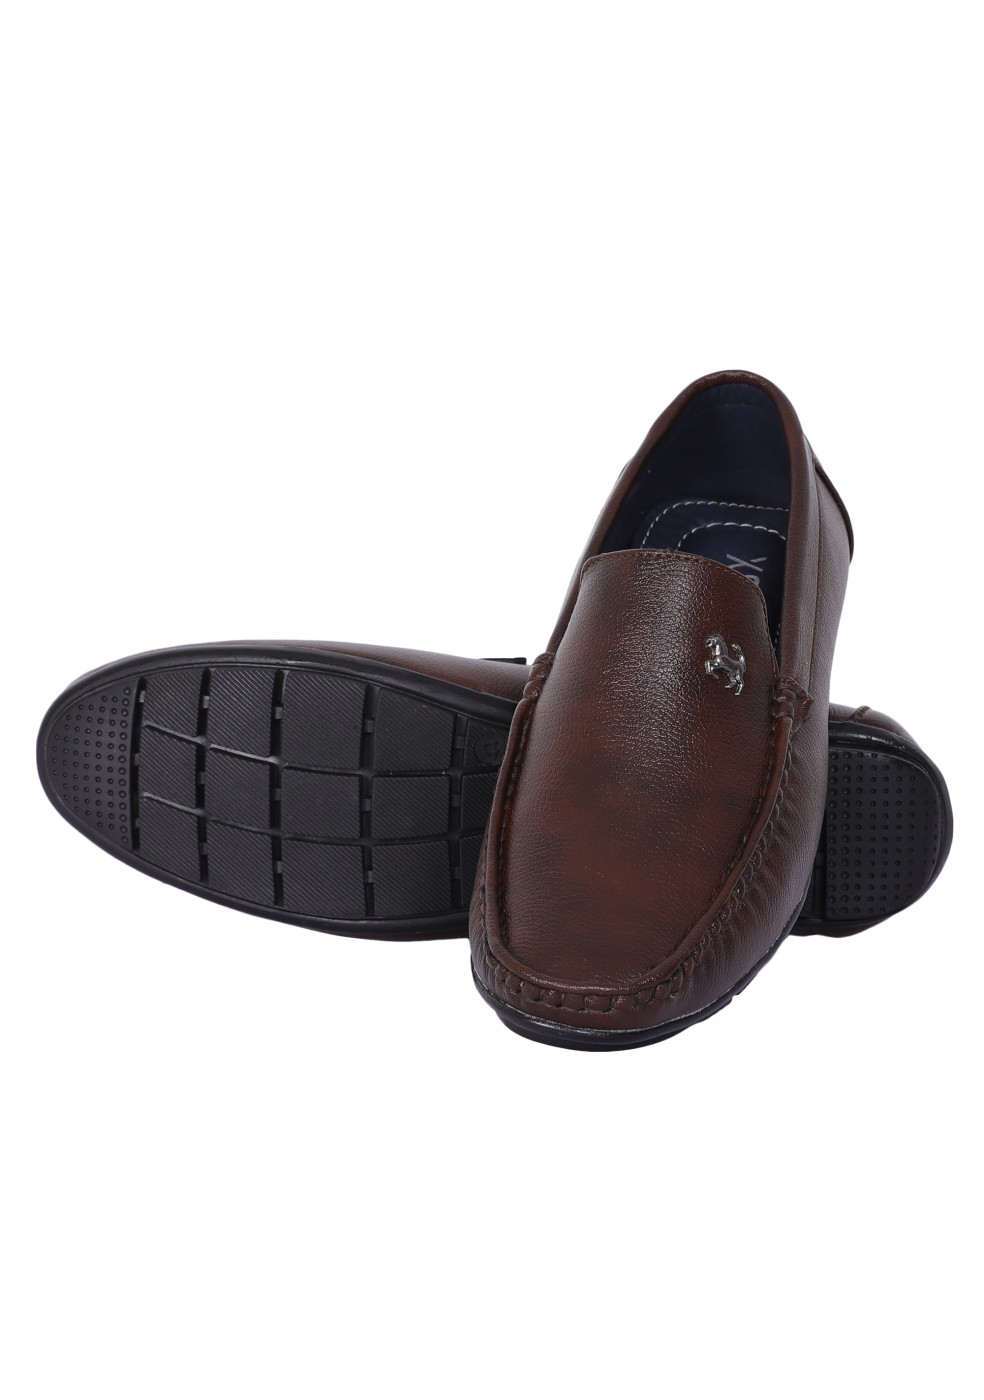 XSTOM Brown Casual Loafers For Men